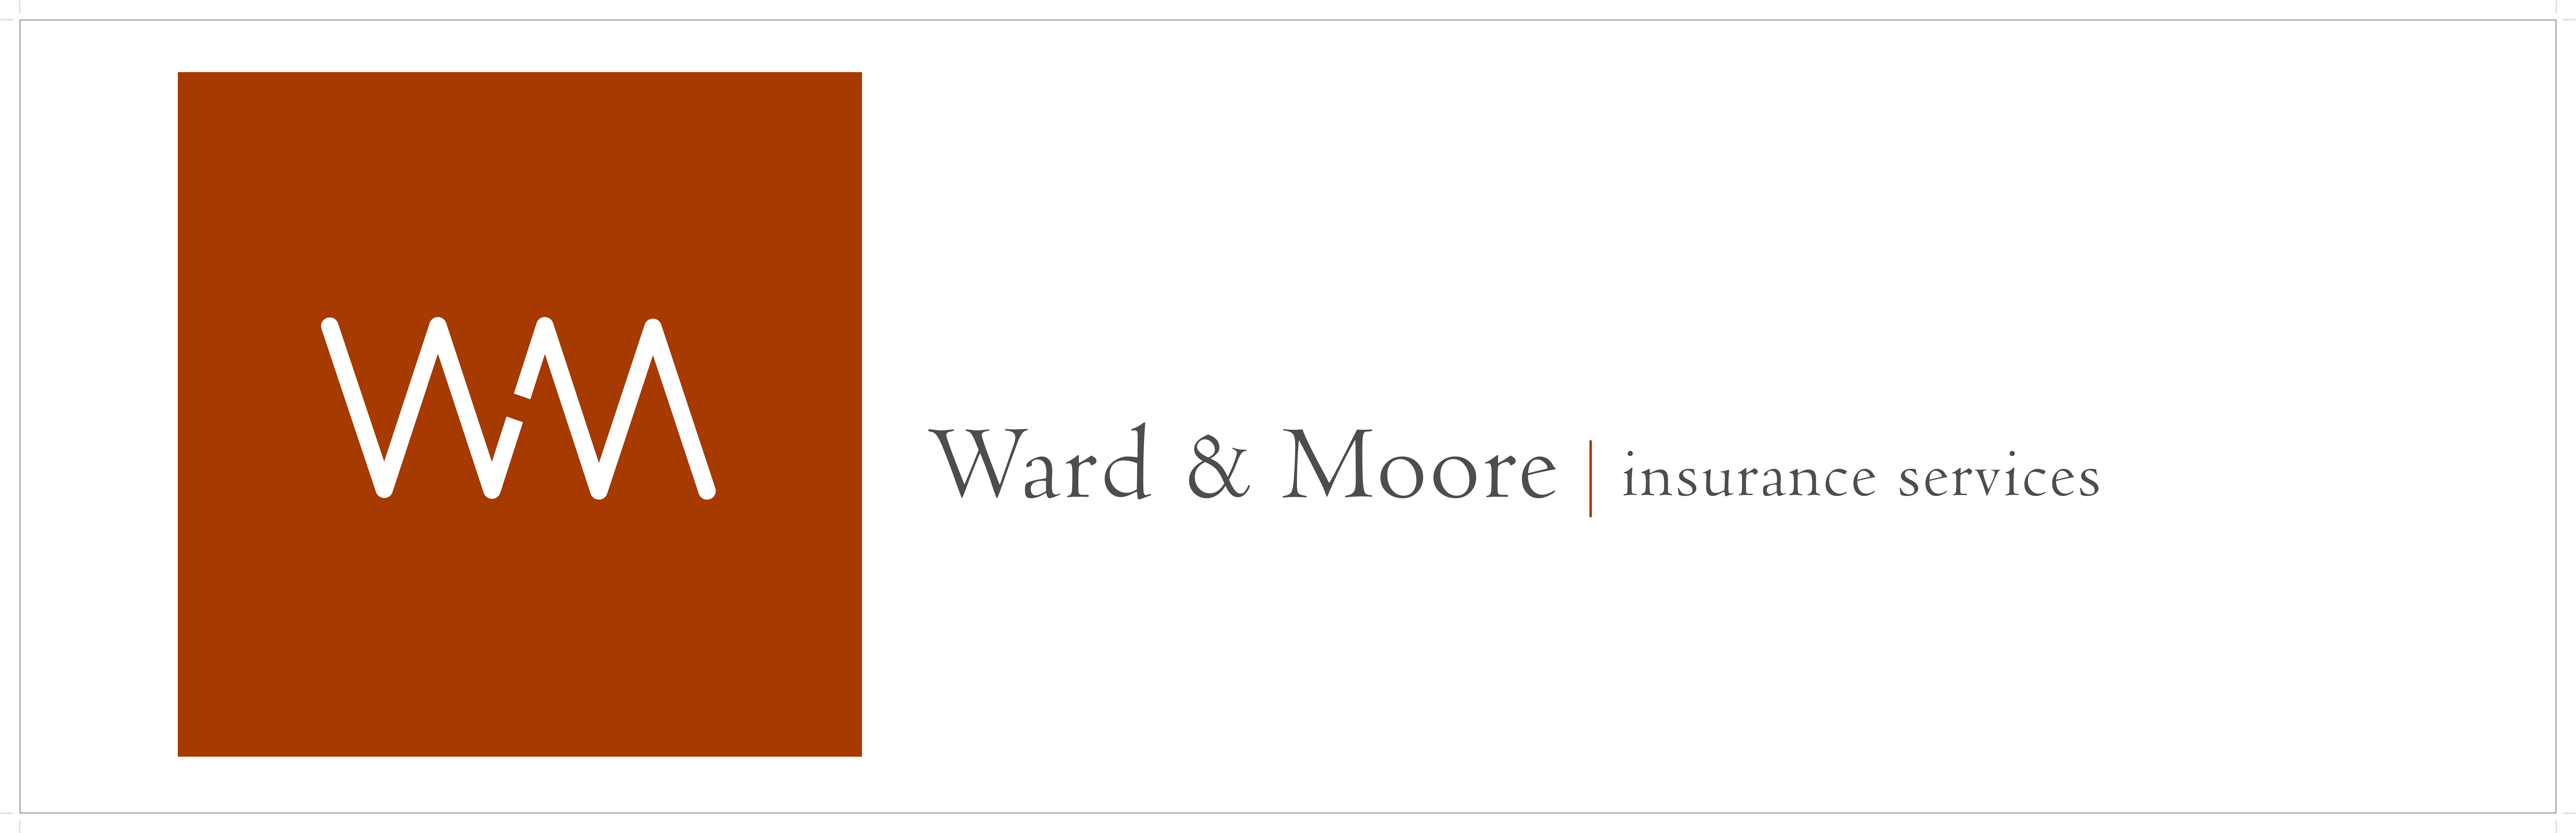 Ward & Moore Insurance Services